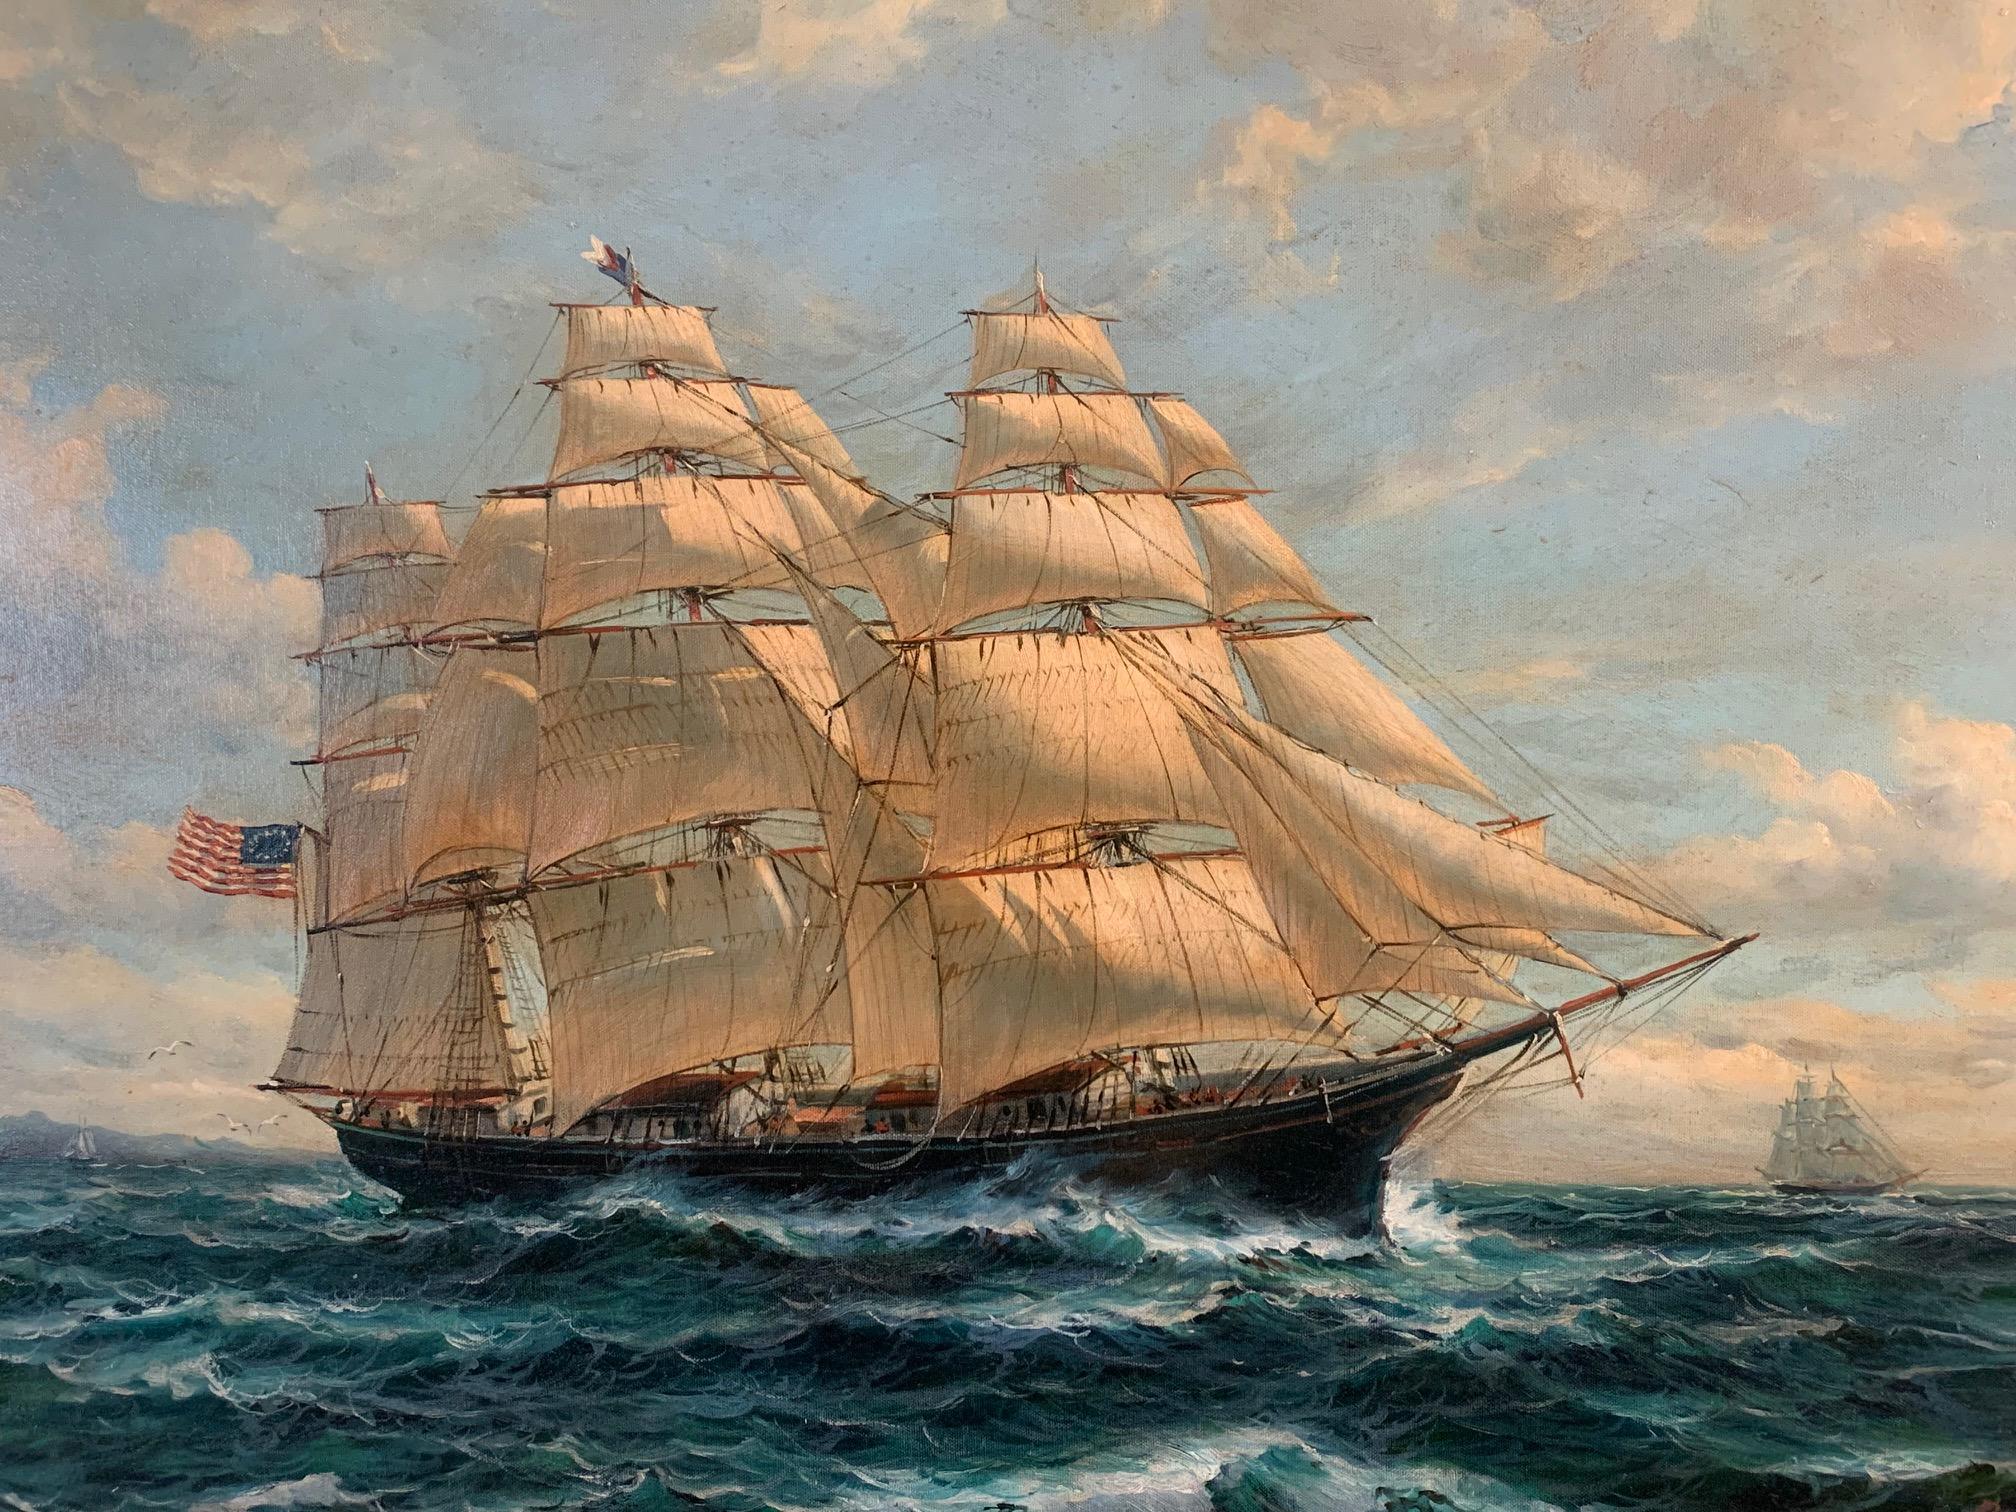 An exciting nautical painting of an impressive multi sailed vintage ship in rough seas by Robert Sanders, 
a listed 20th century American Nautical artist.

Measures: Framed 35” H x 47” W x 4” D
Canvas 24” H x 36” W.